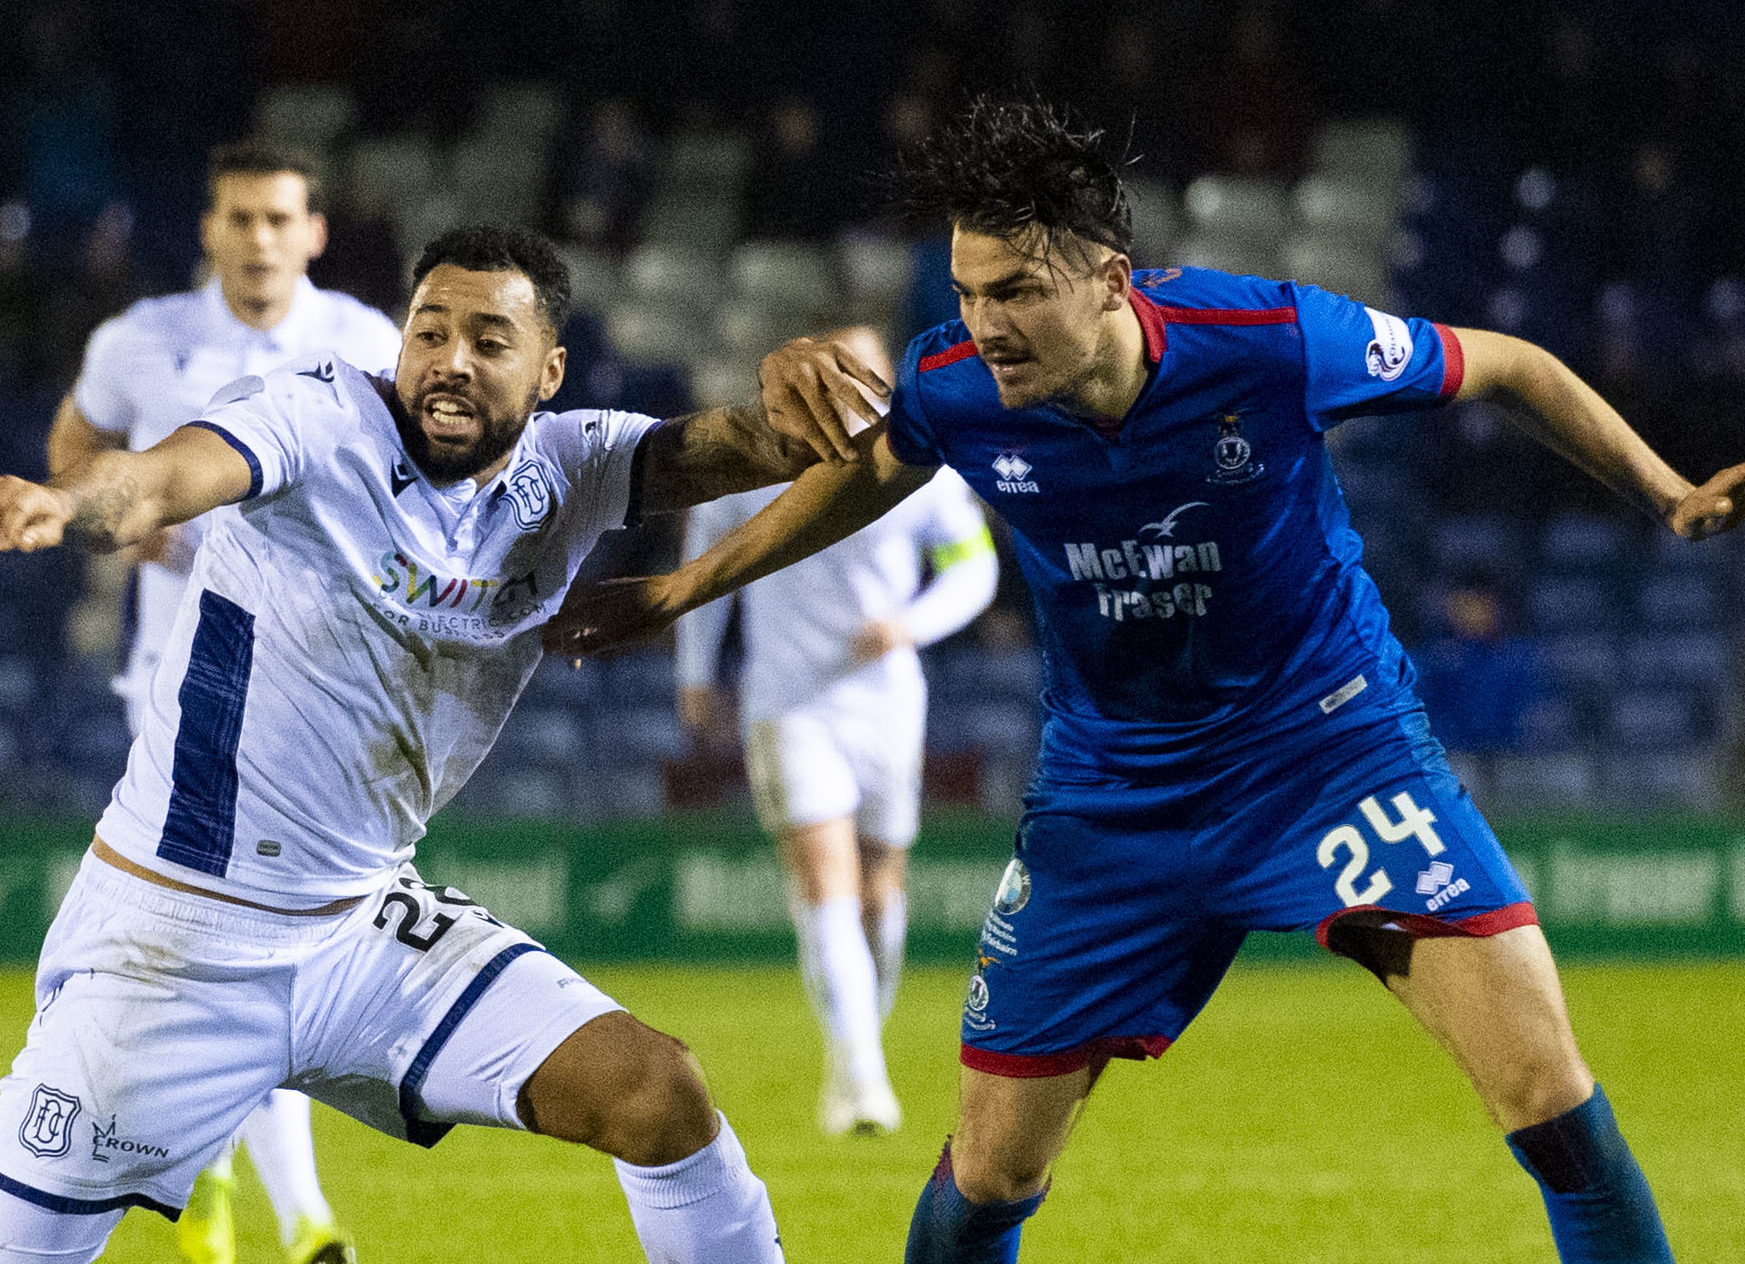 Kane Hemmings in action at Inverness.